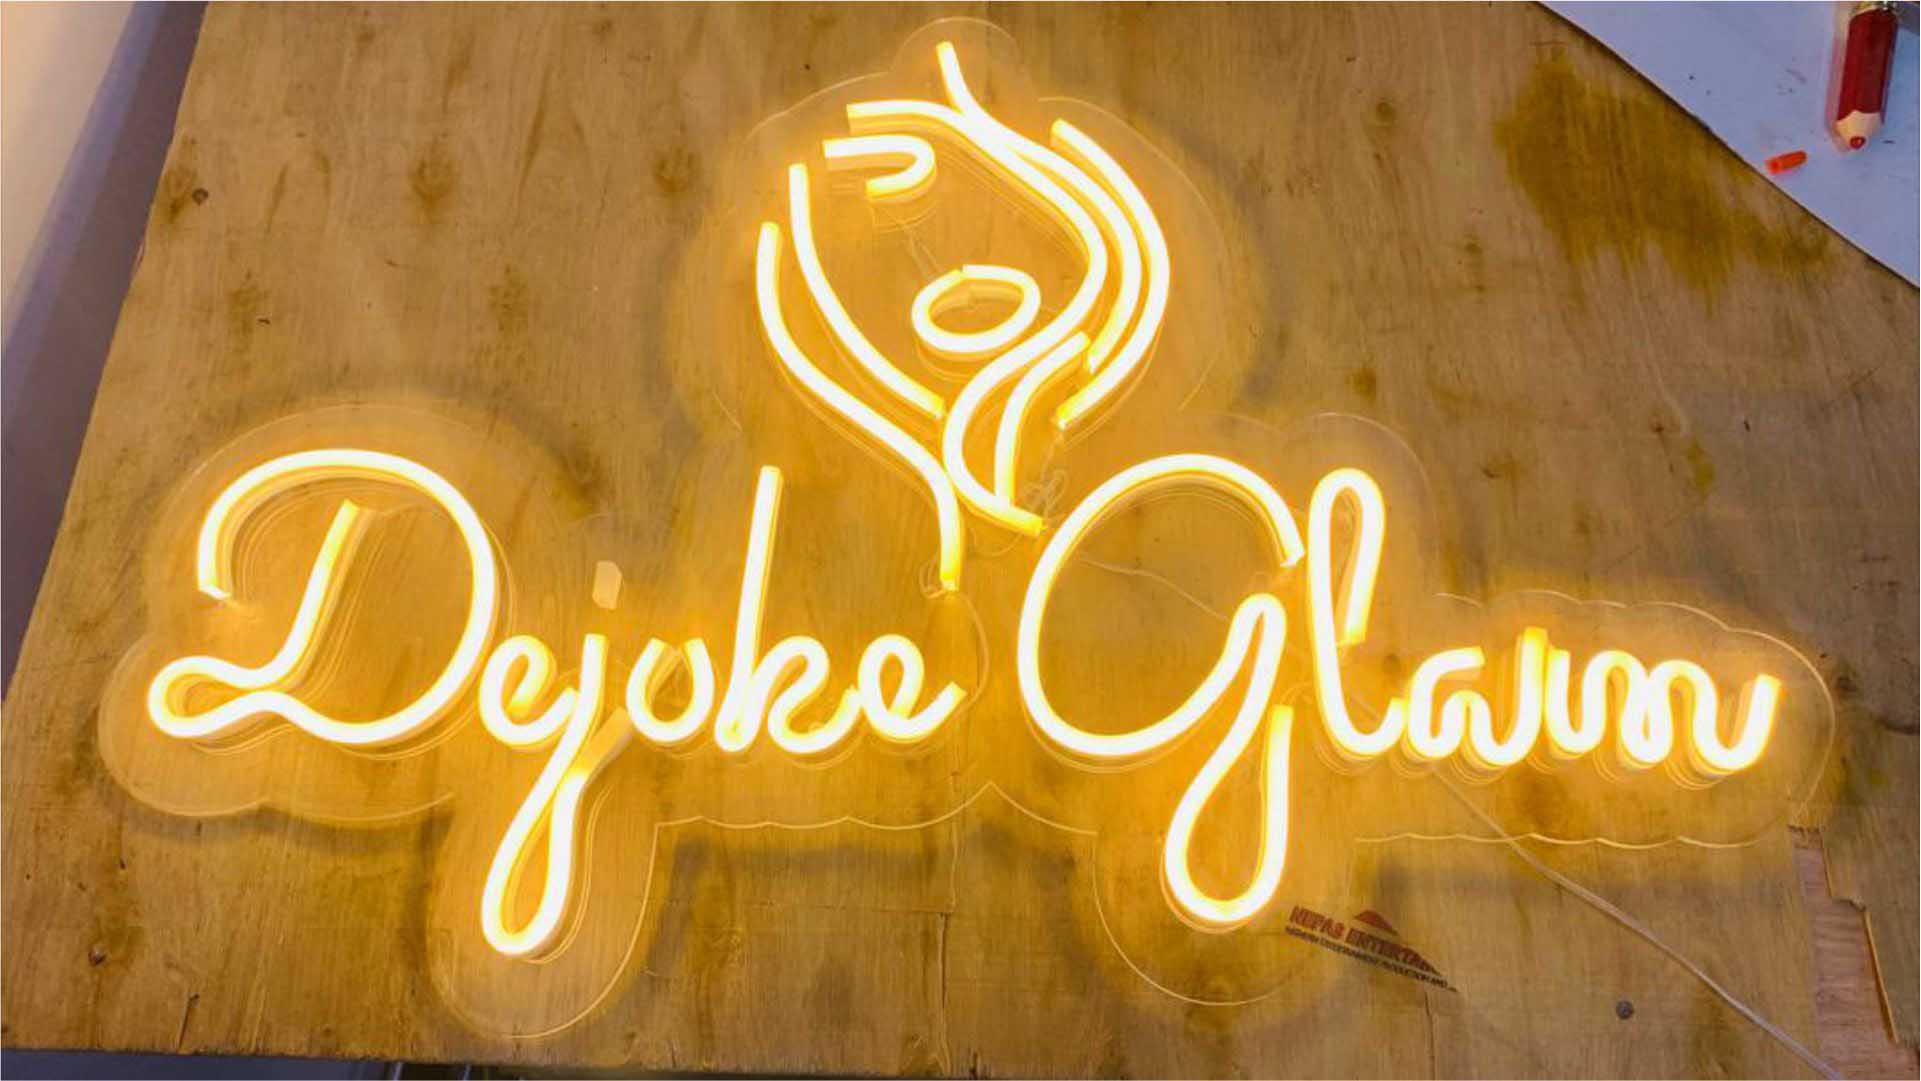 LED Neon Signs Maker Design and Branding in Lagos Nigeria